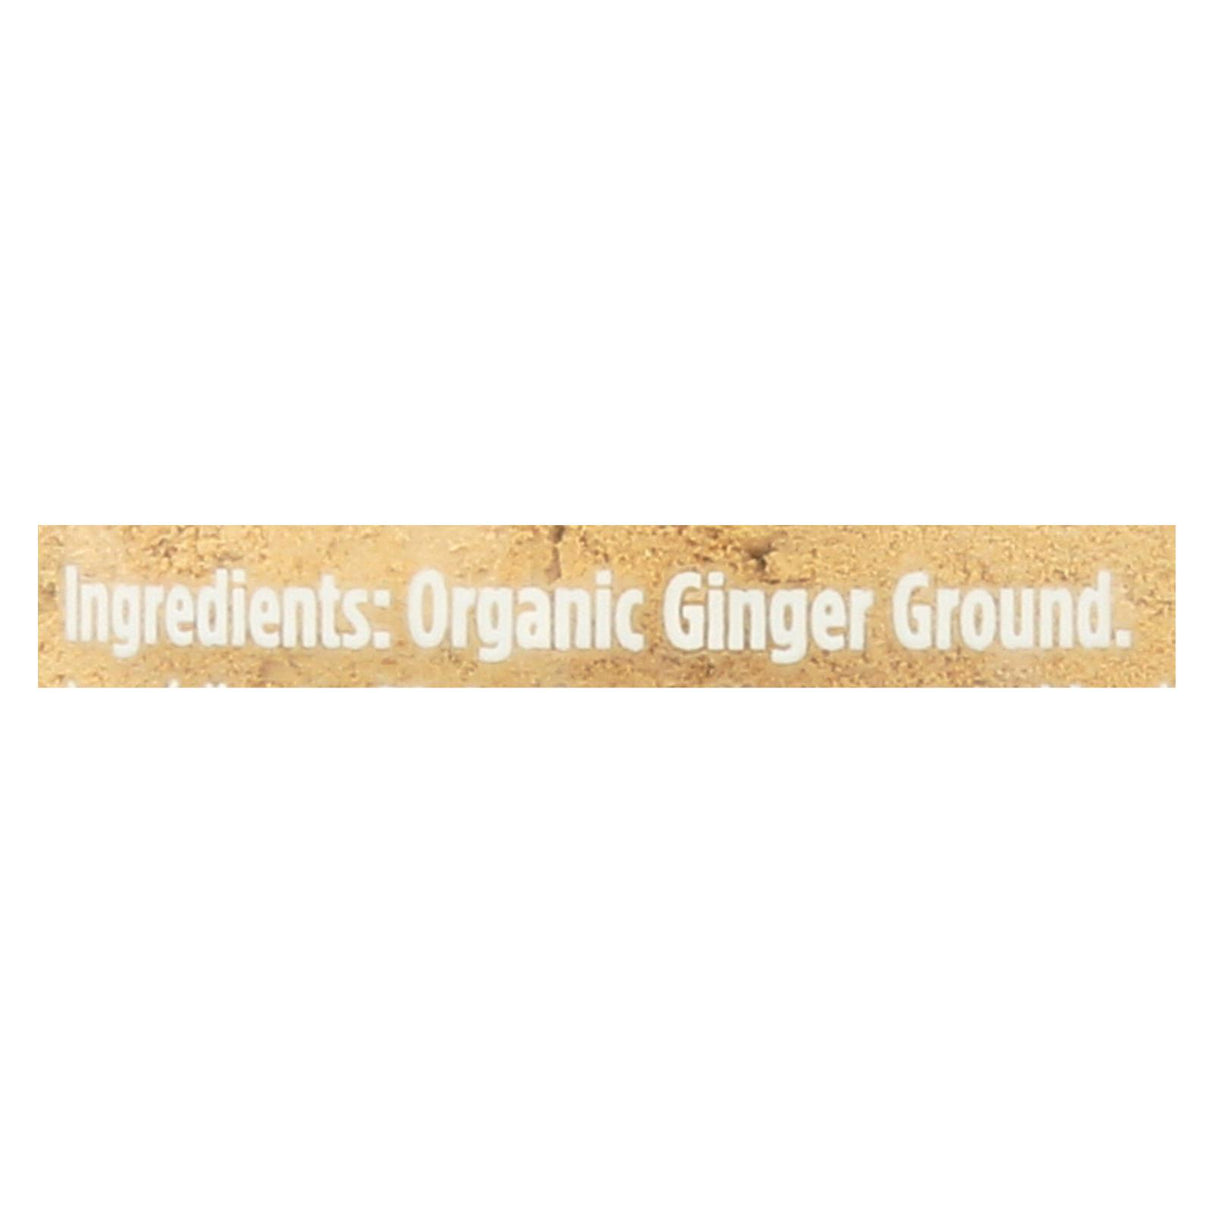 Organic Ground Ginger, 1.2 Oz (Pack of 3) by Spicely Organics - Cozy Farm 